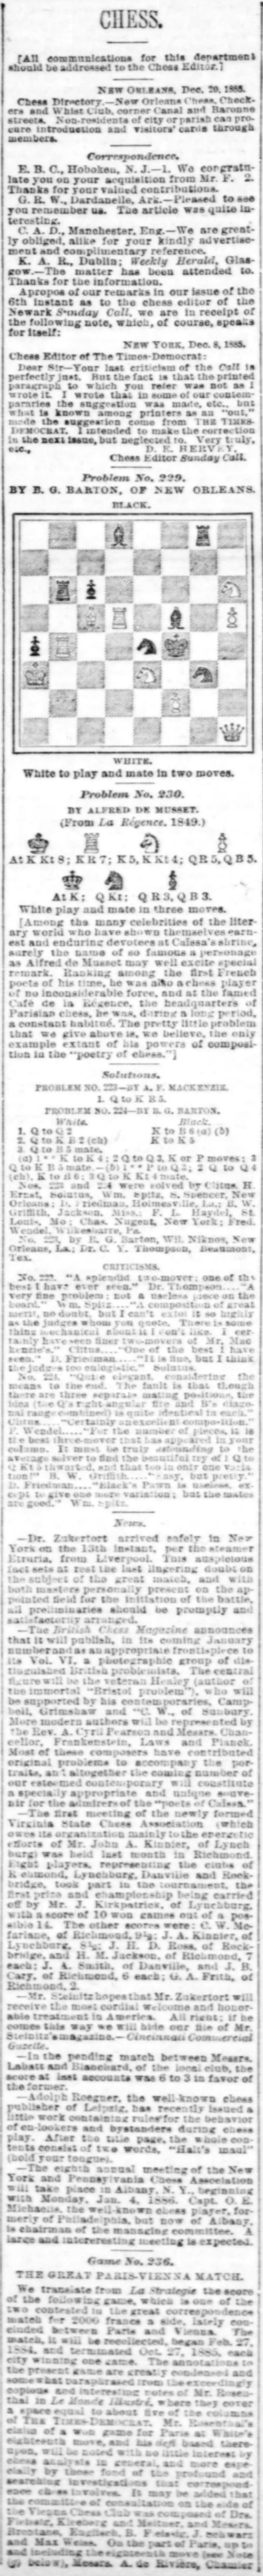 1885.12.20-01 New Orleans Times-Democrat.png